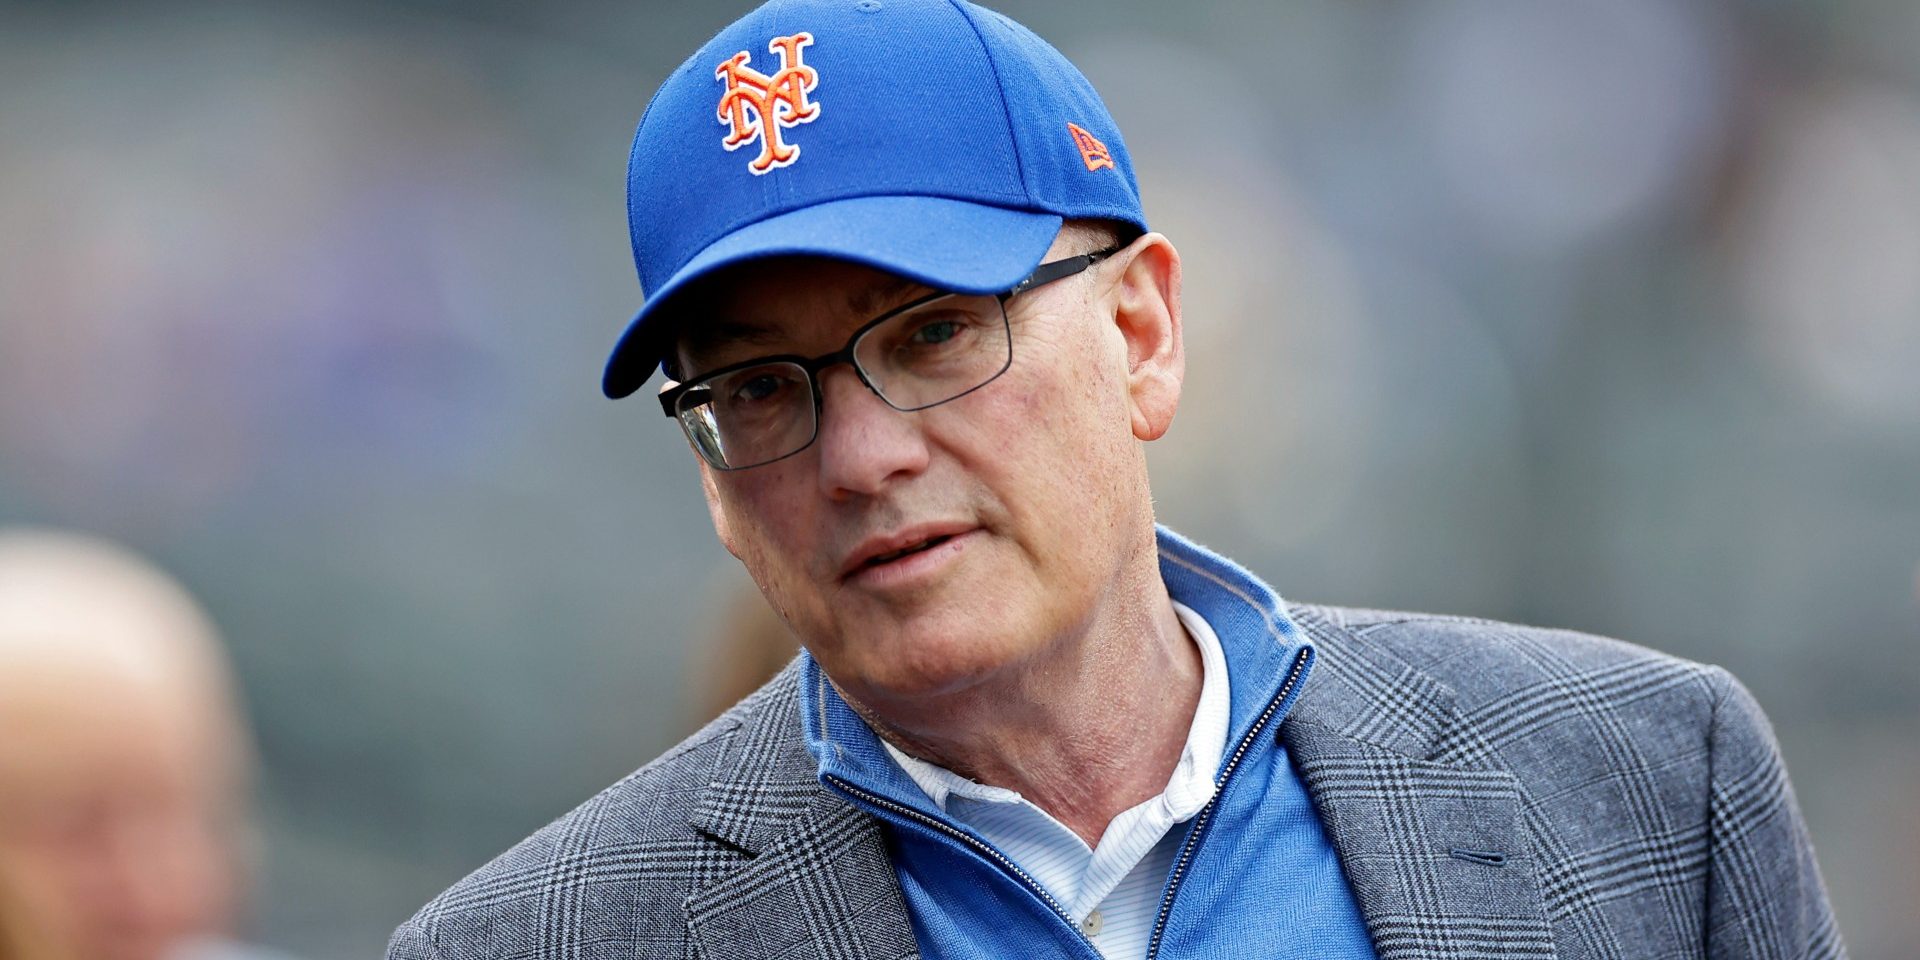 Mets owner Steve Cohen apologizes to 'furious' Marlins after unplayable field postpones crucial game